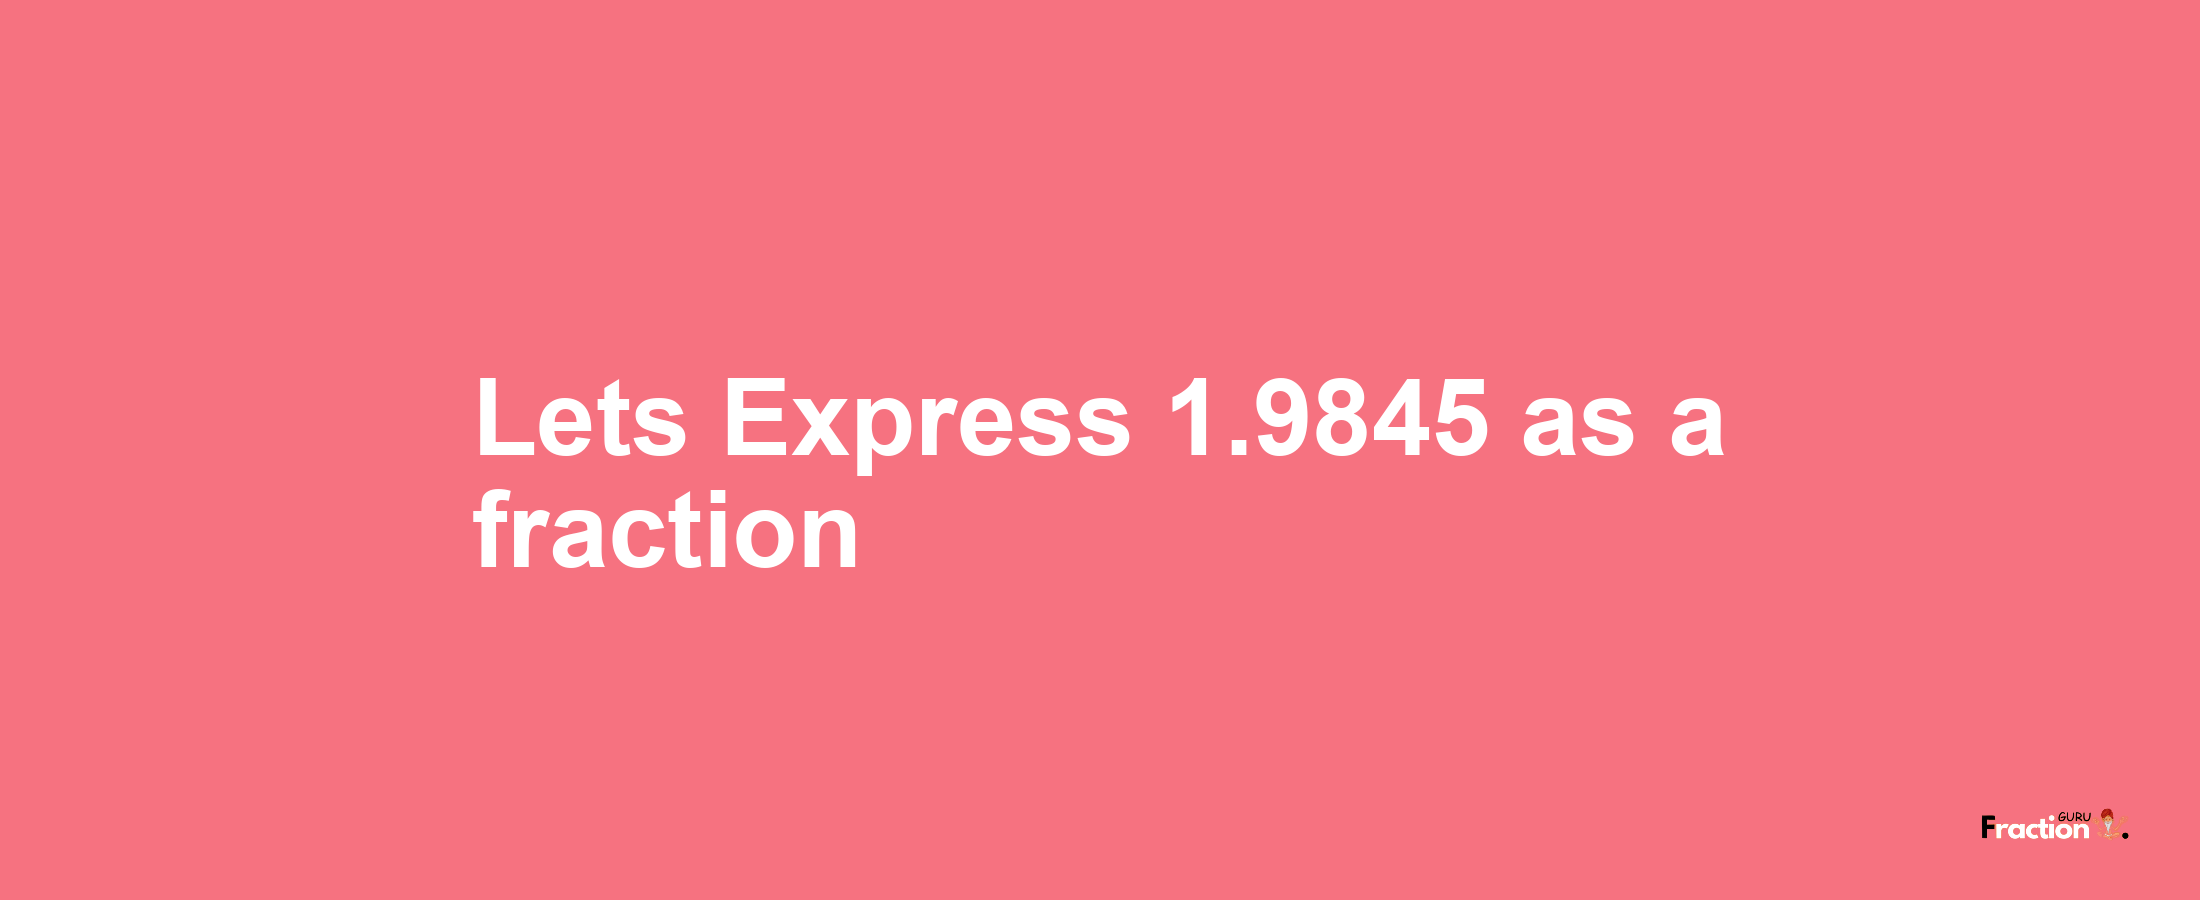 Lets Express 1.9845 as afraction